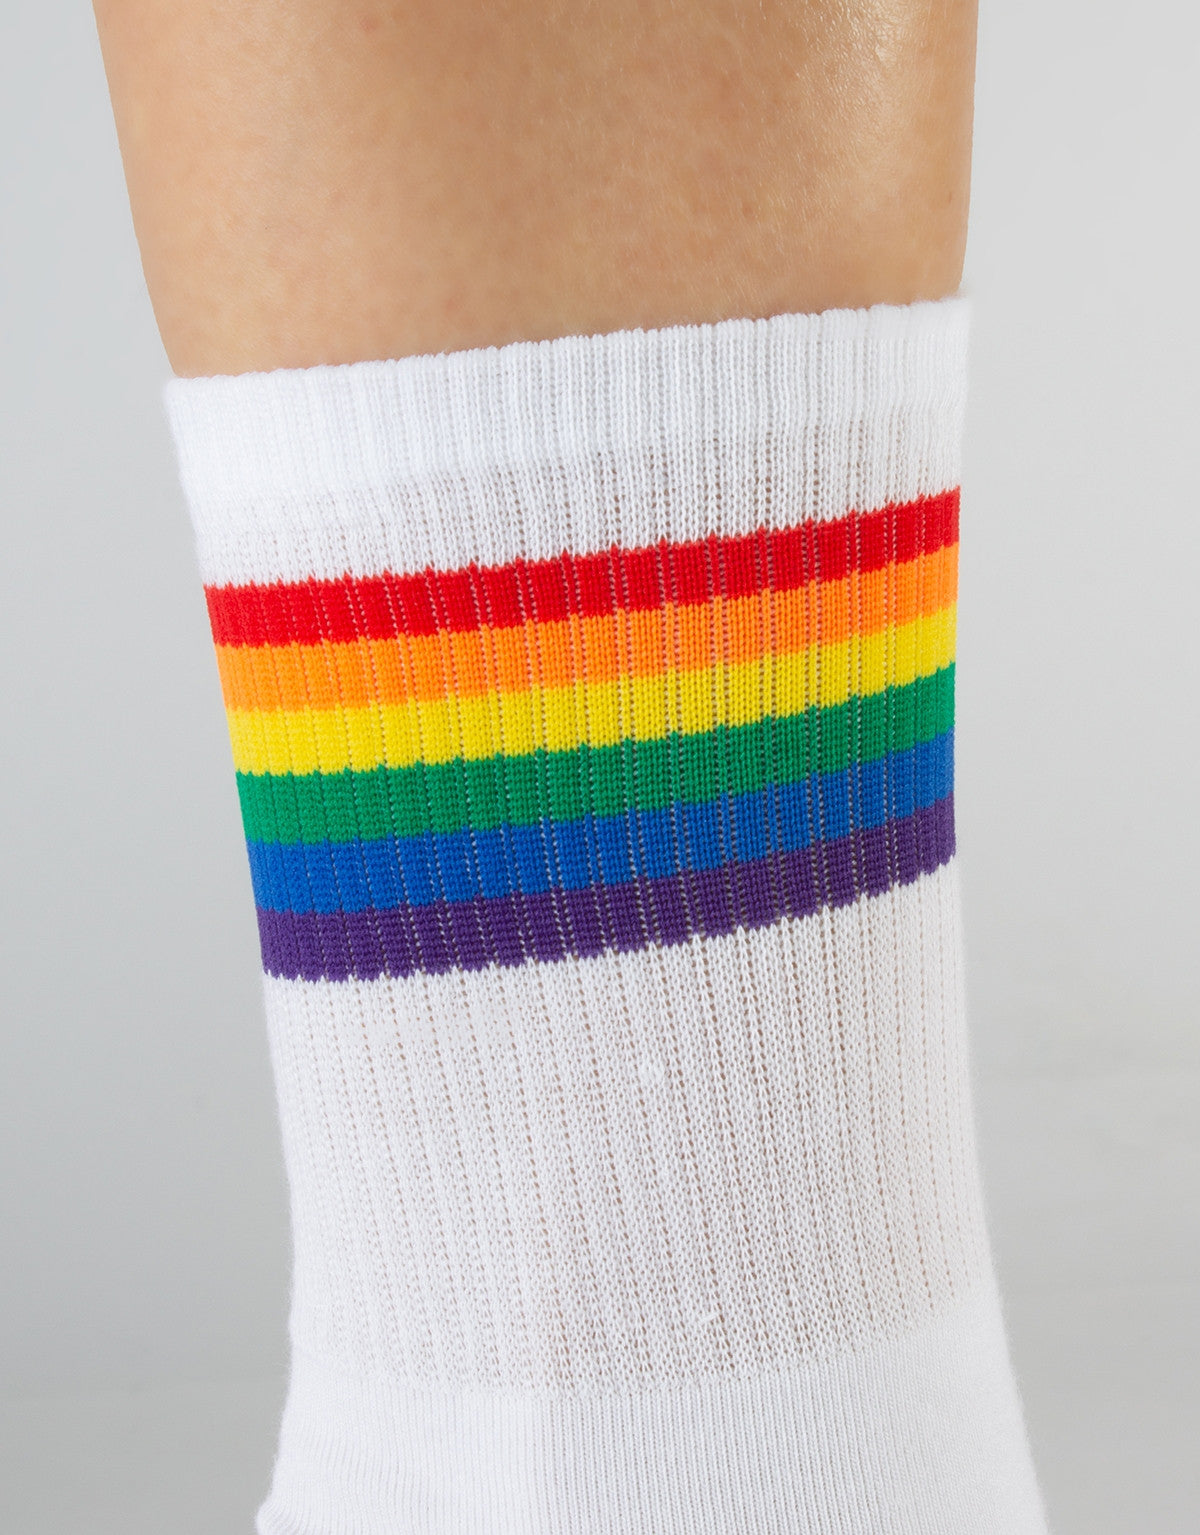 Calzitaly Rainbow Cotton Sock - White cotton ankle socks with a cushioned sole, ribbed rainbow sports style striped cuff, perfect for LGBTQ+ Gay Pride